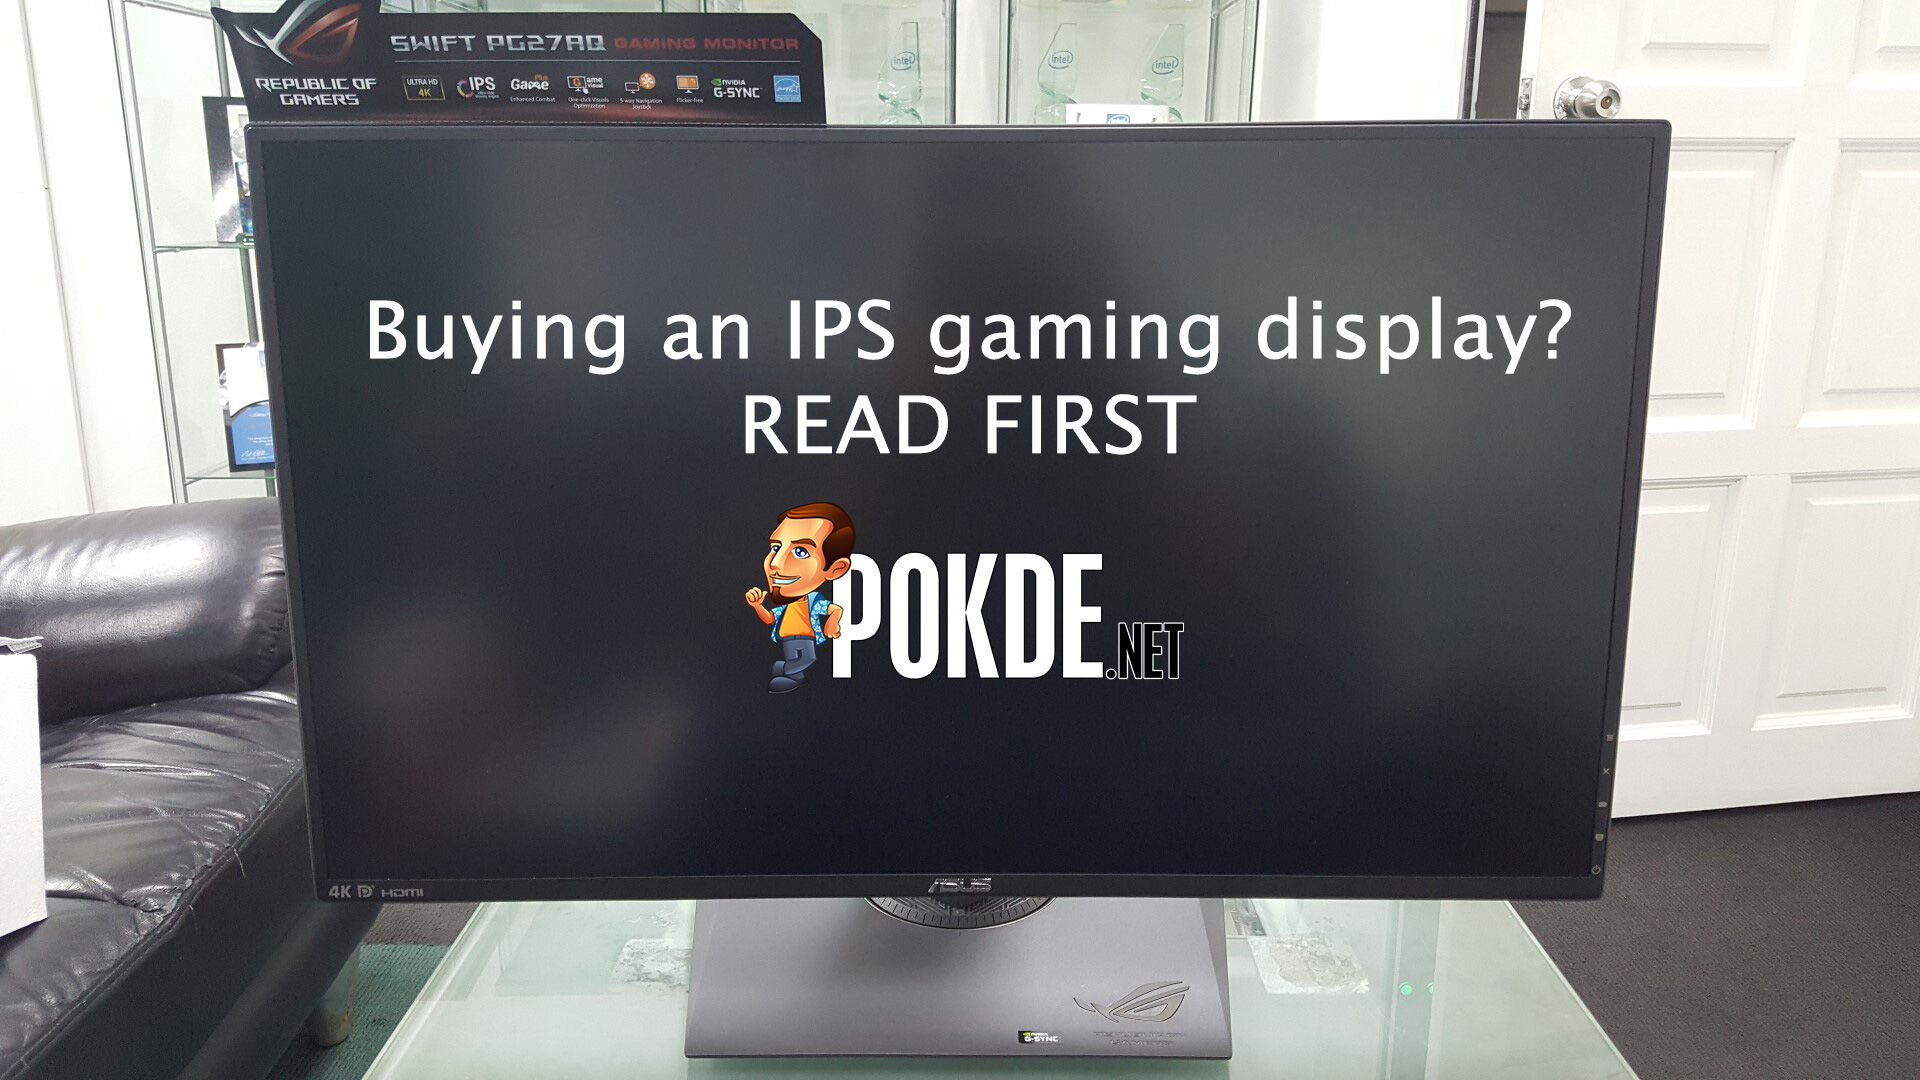 Buying an "IPS gaming display"? Read this first... Seriously! 29